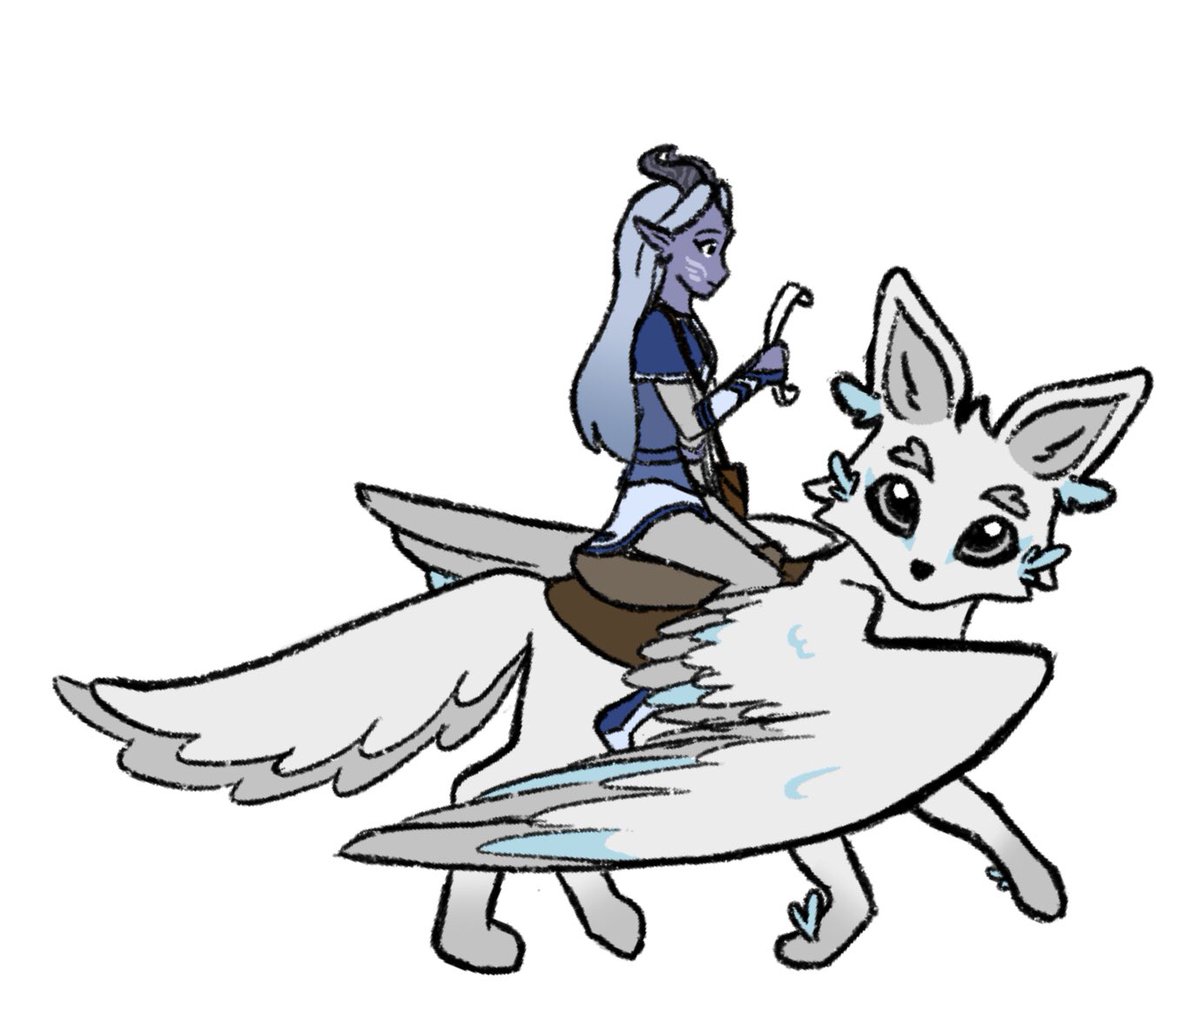 - Kinda like a metal detector but they’re giant foxes with wings - Muttias wasn’t trained to do these things I just made them up for l o r eAnyway he helps Akia deliver her messages and do what she loves best!